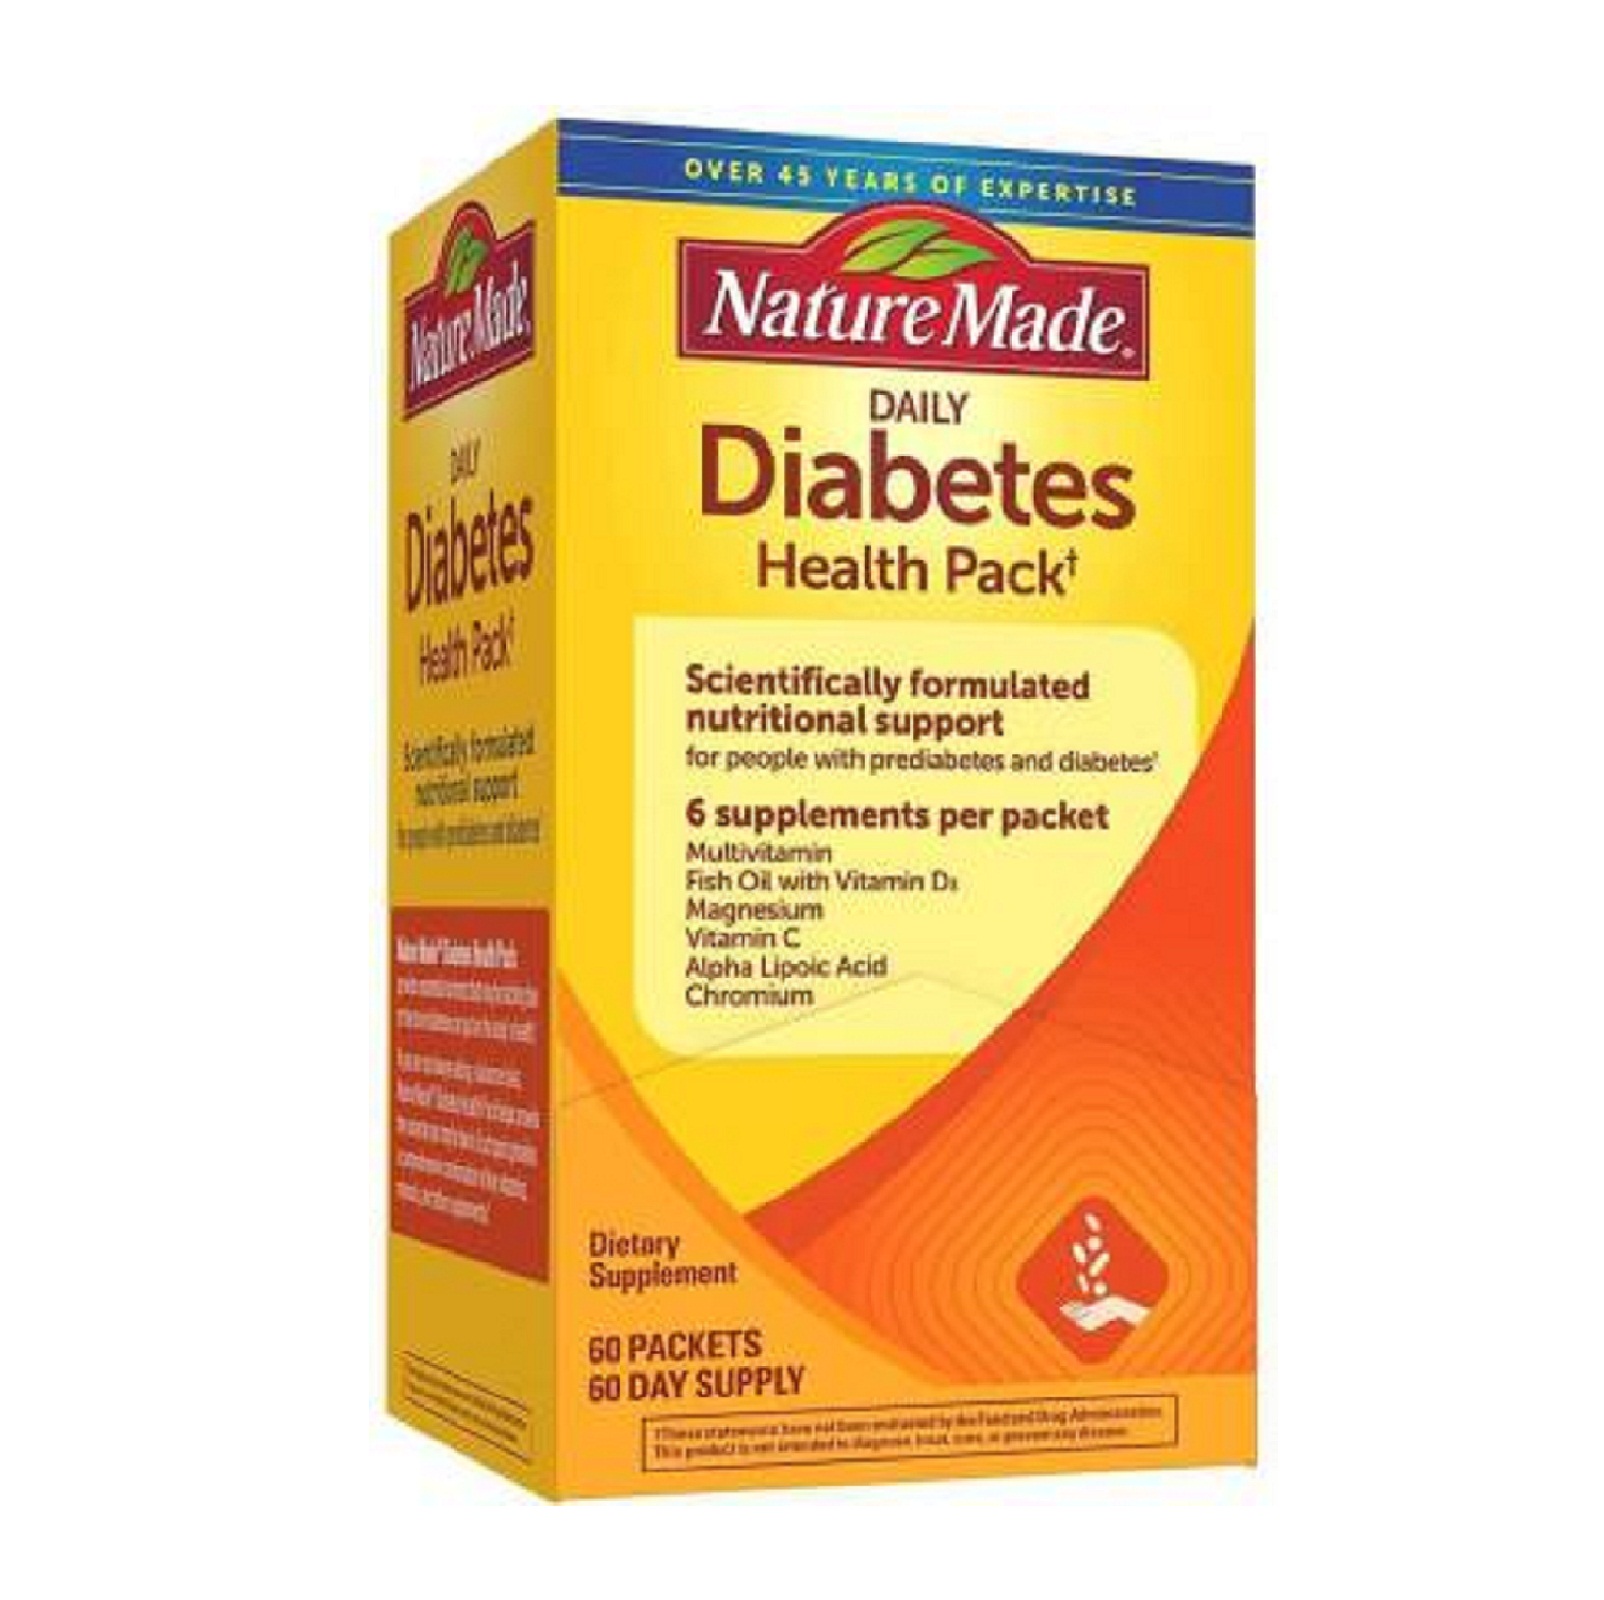 Nature Made Diabetes Health Pack 60 Packets Carlo Pacific